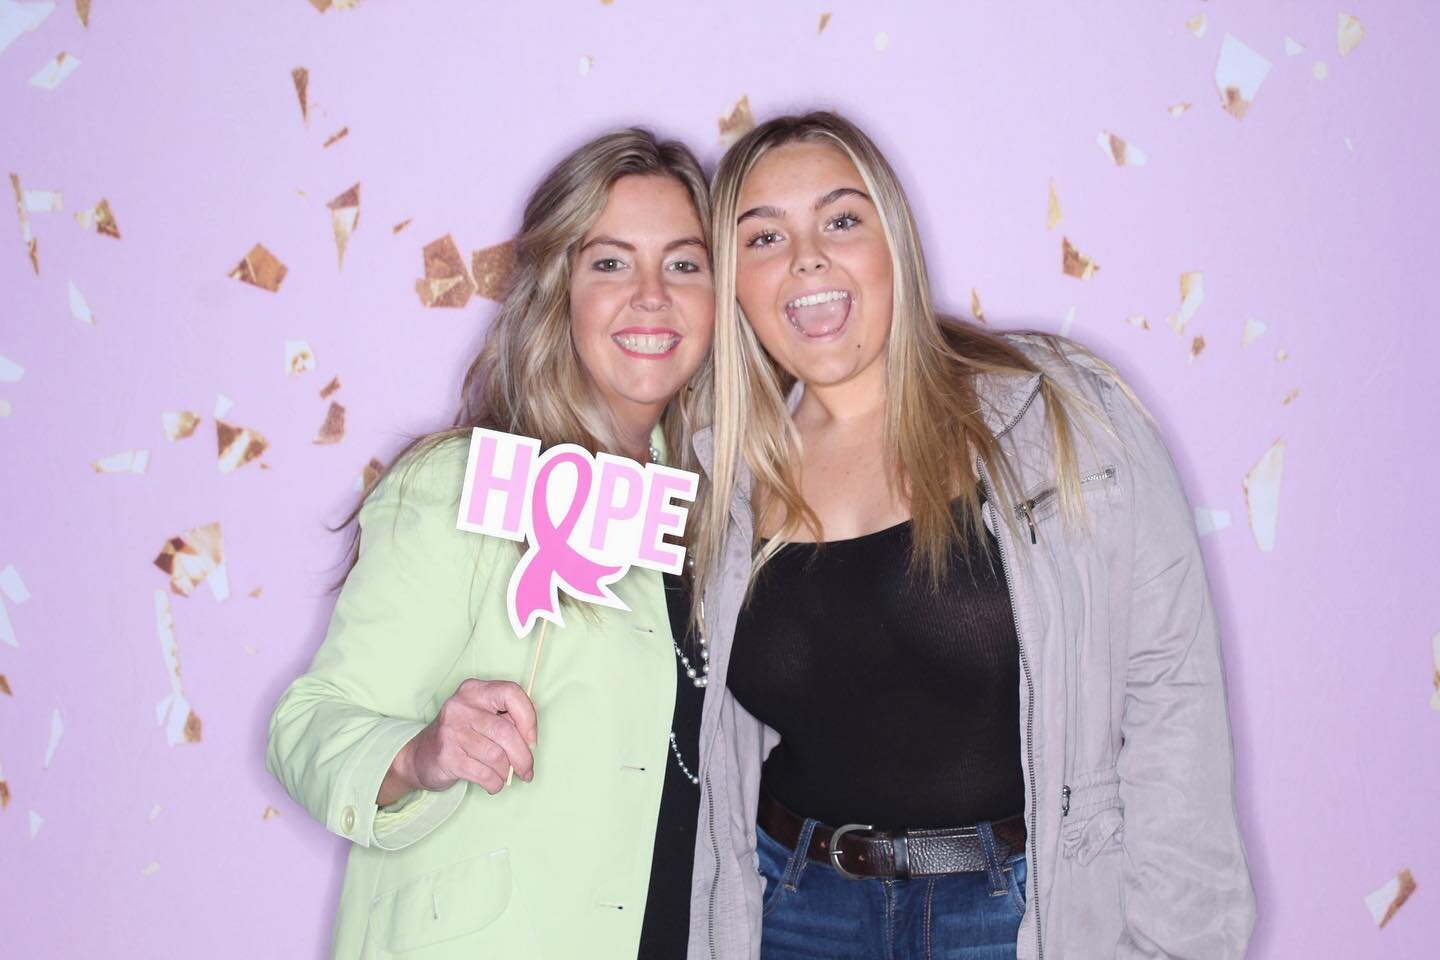 We had so much fun with @wqmx at their 23rd annual Bosom Buddies event! Proceeds went to Cleveland Clinic Akron General to provide free mammograms to those who cannot afford them. 🎀

&bull;
&bull;
&bull;
&bull;

#photobooth #photoboothrental #openai